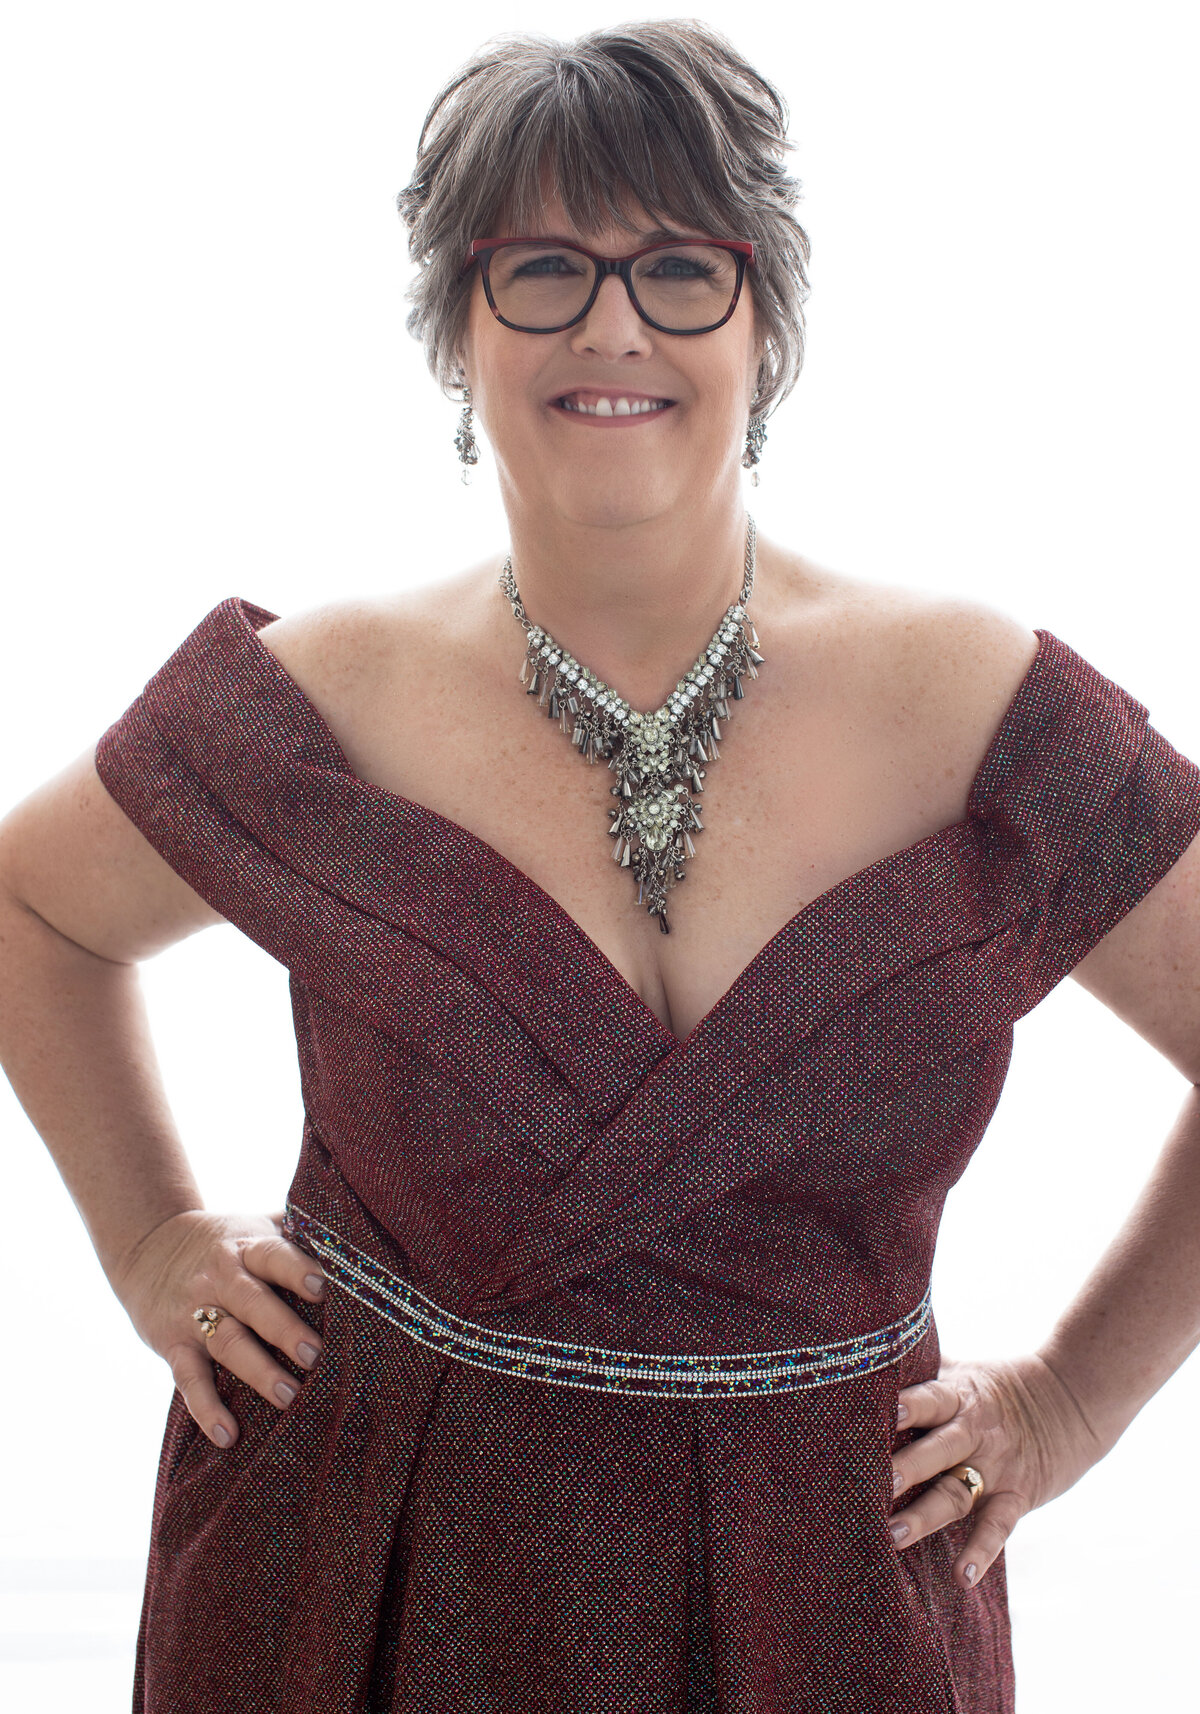 Cincinnati portrait featuring a joyful woman adorned in a detailed necklace, wearing glasses, and elegantly styled in an off-shoulder patterned dress. The image exemplifies confident and radiant studio photography.